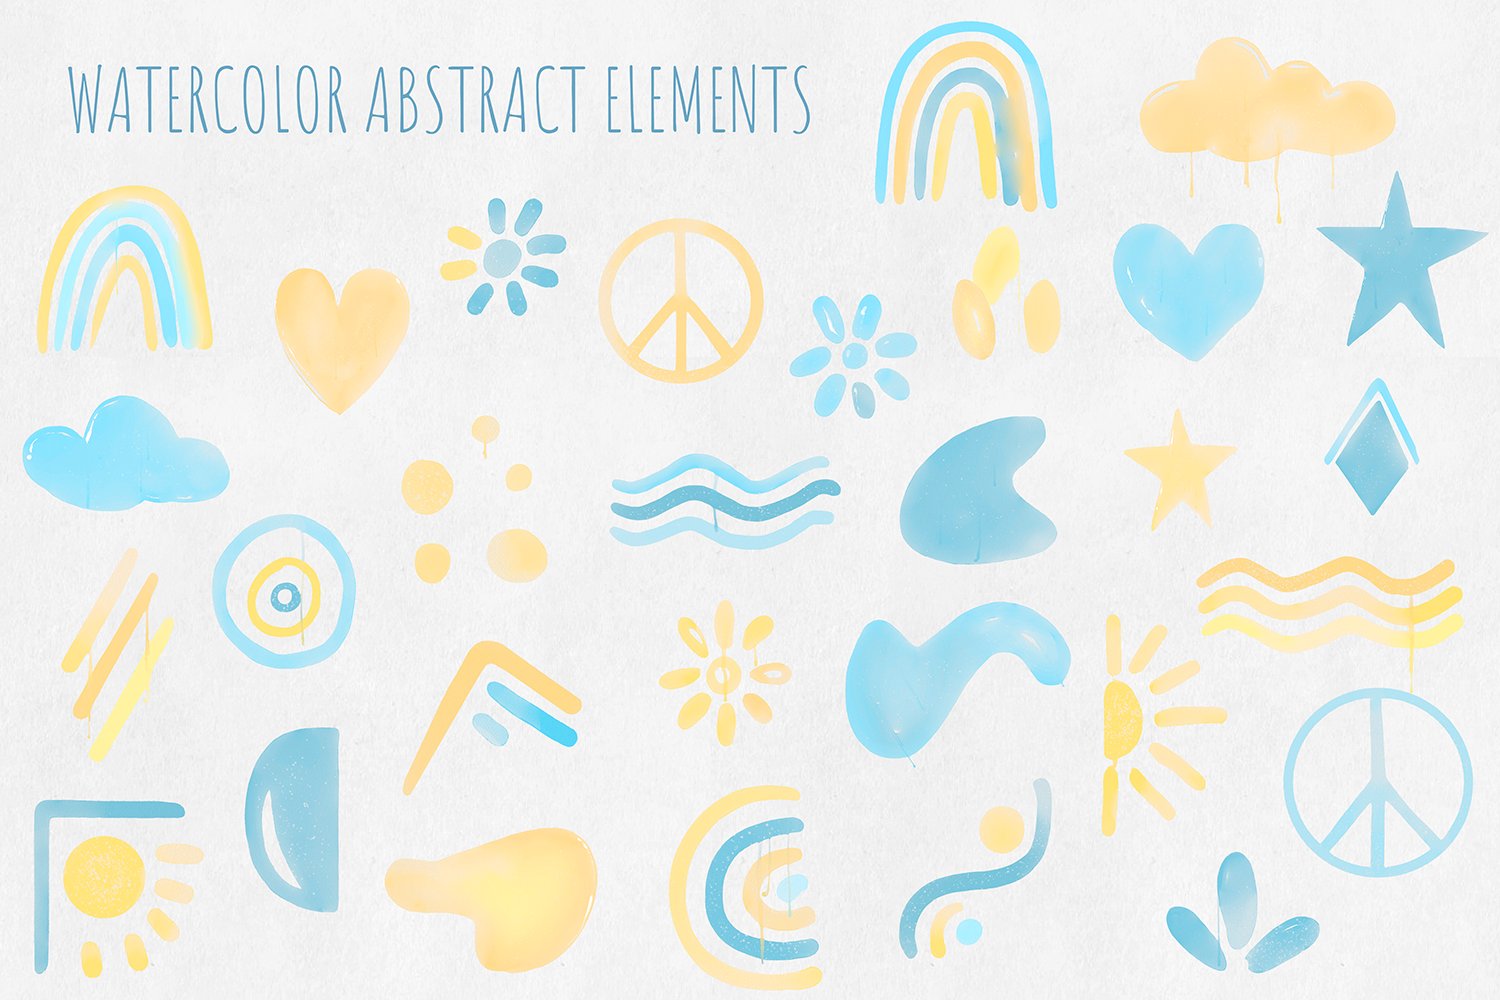 UA Abstract watercolor patterns preview image.